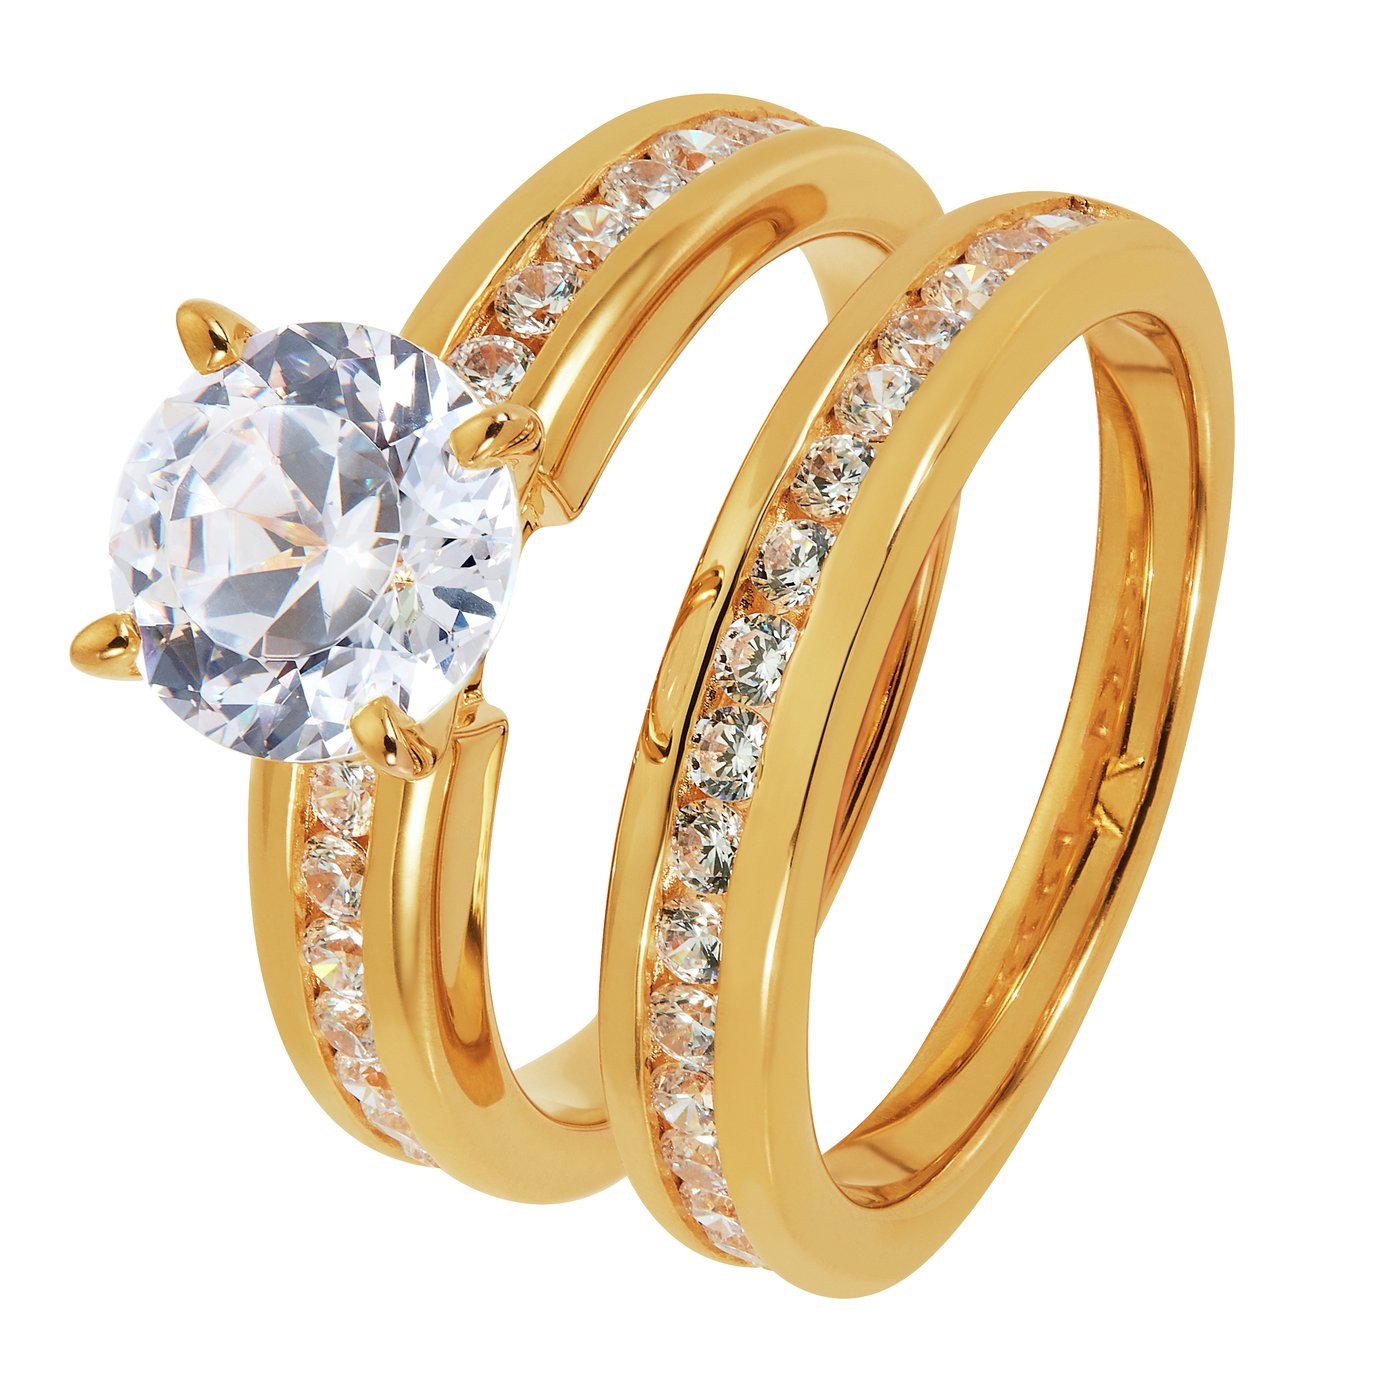 Revere 9ct Gold Plated Cubic Zirconia Bridal Ring Set - Q